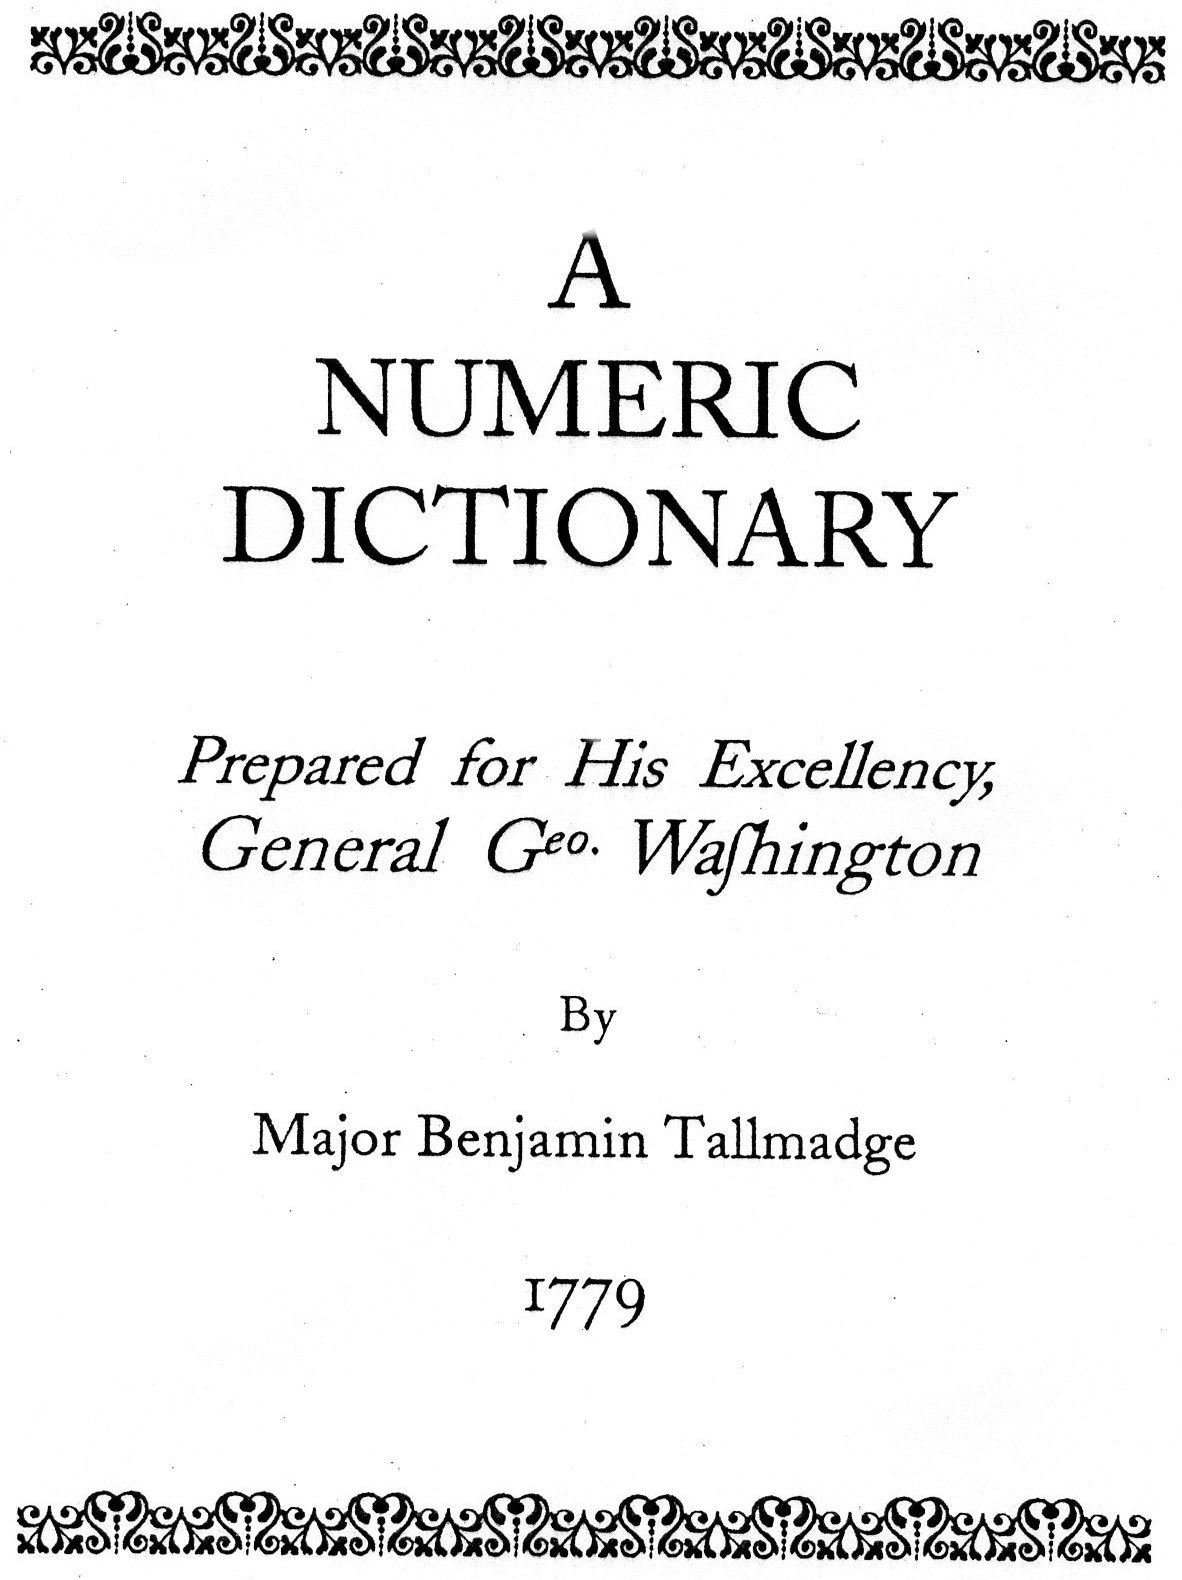 Washington's Numeric Dictionary, or the Continental Army's First Code Book